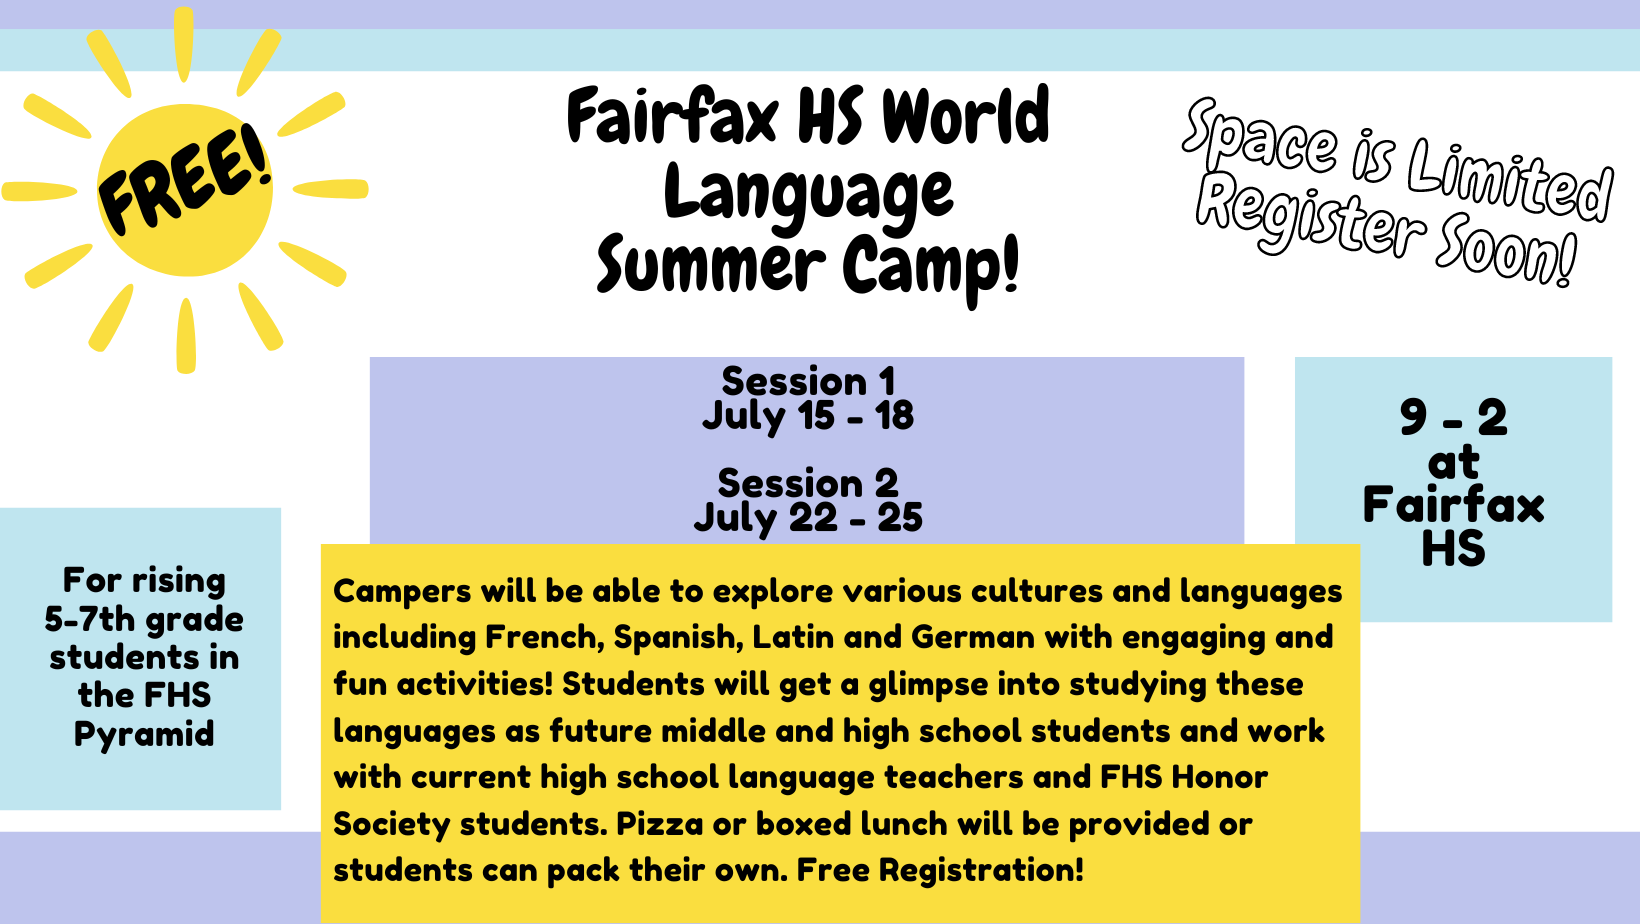 Information about camp: FHS is offering a free world language camp for rising 5-7th graders in the FHS pyramid.